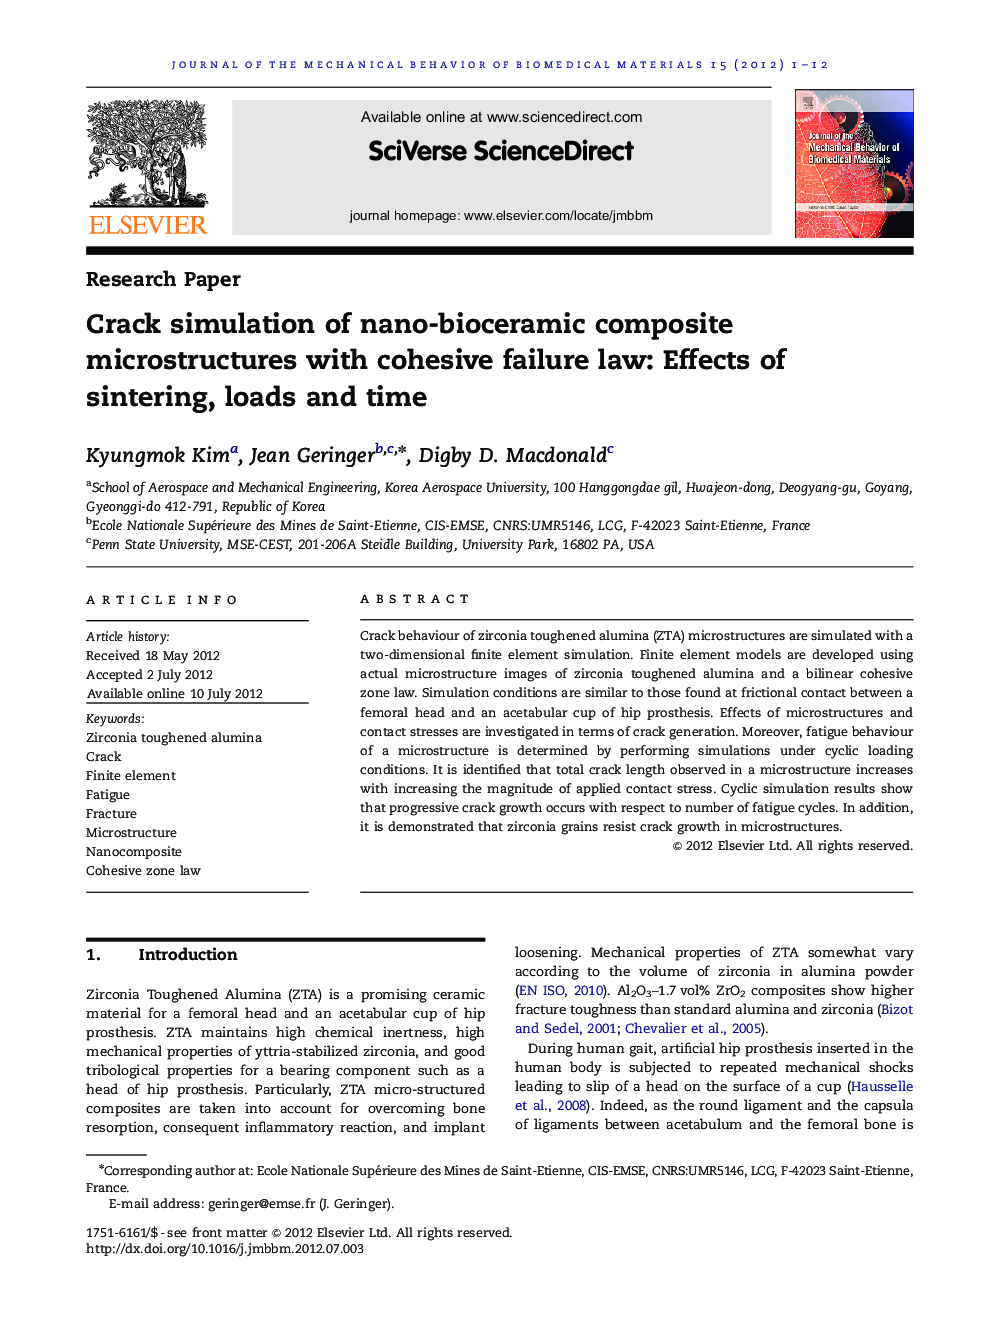 Crack simulation of nano-bioceramic composite microstructures with cohesive failure law: Effects of sintering, loads and time